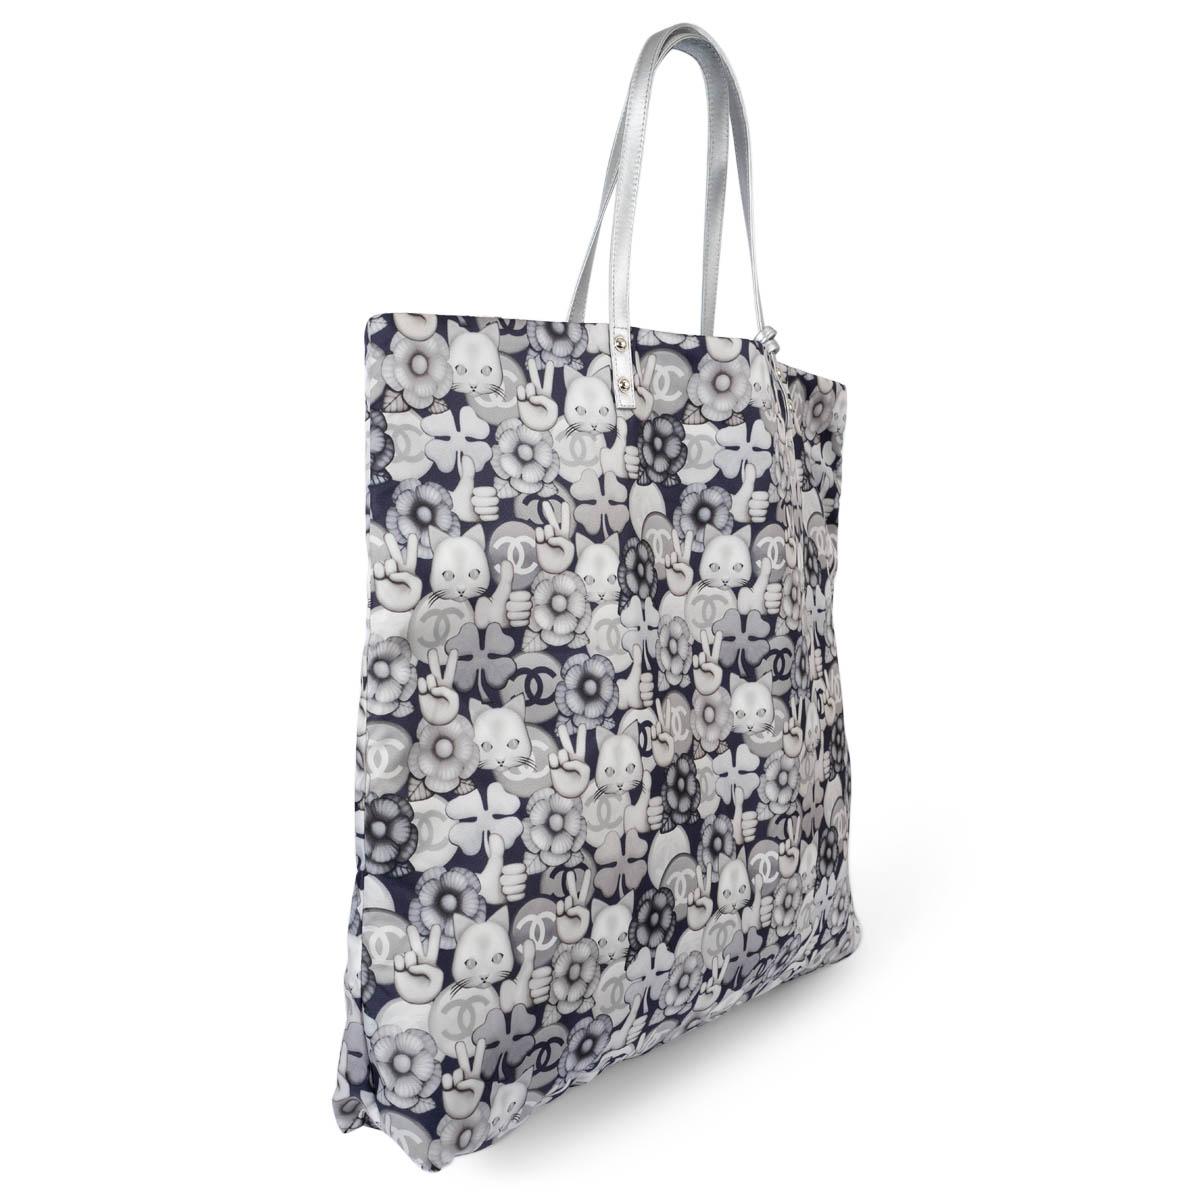 100% authentic Chanel Emoticon Large Shopping tote in navy blue and silver printed nylon. Features metallic silver leather handles and zip pouch. Lined in quilted navy blue nylon with an open pocket against the back. Has been carried once and is in